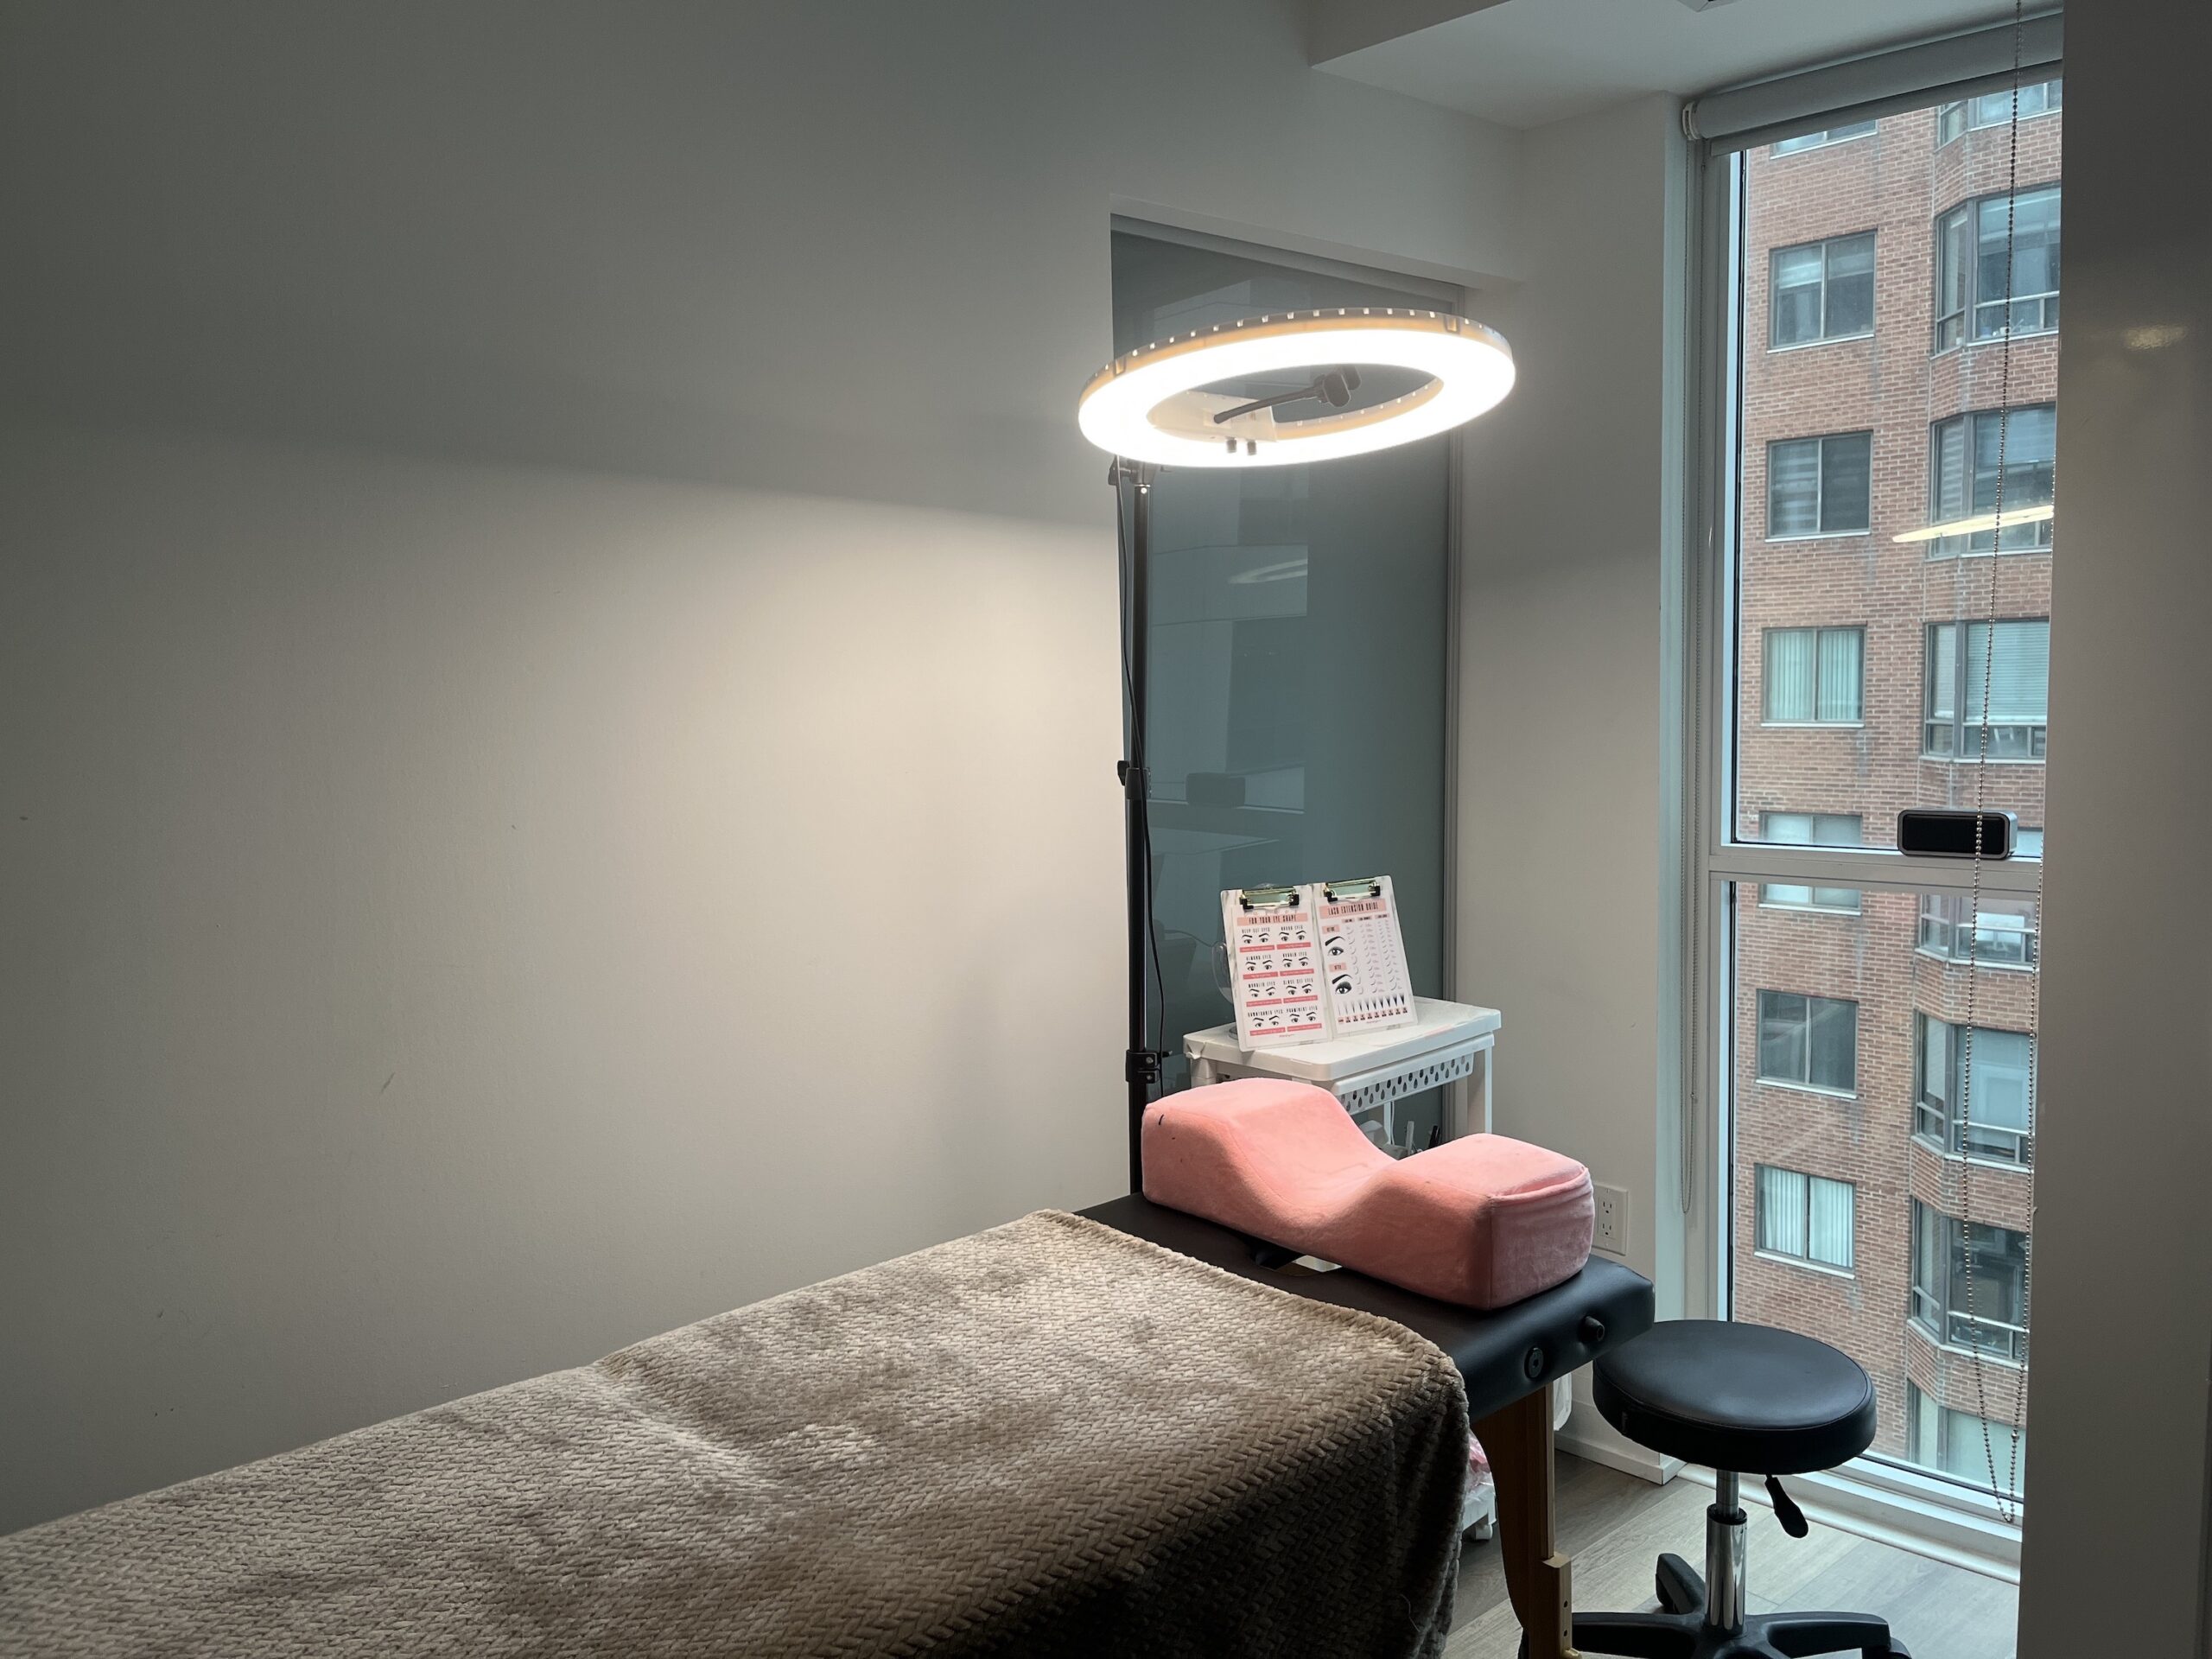 A massage table with a pink neck pillow and an overhead ring light.